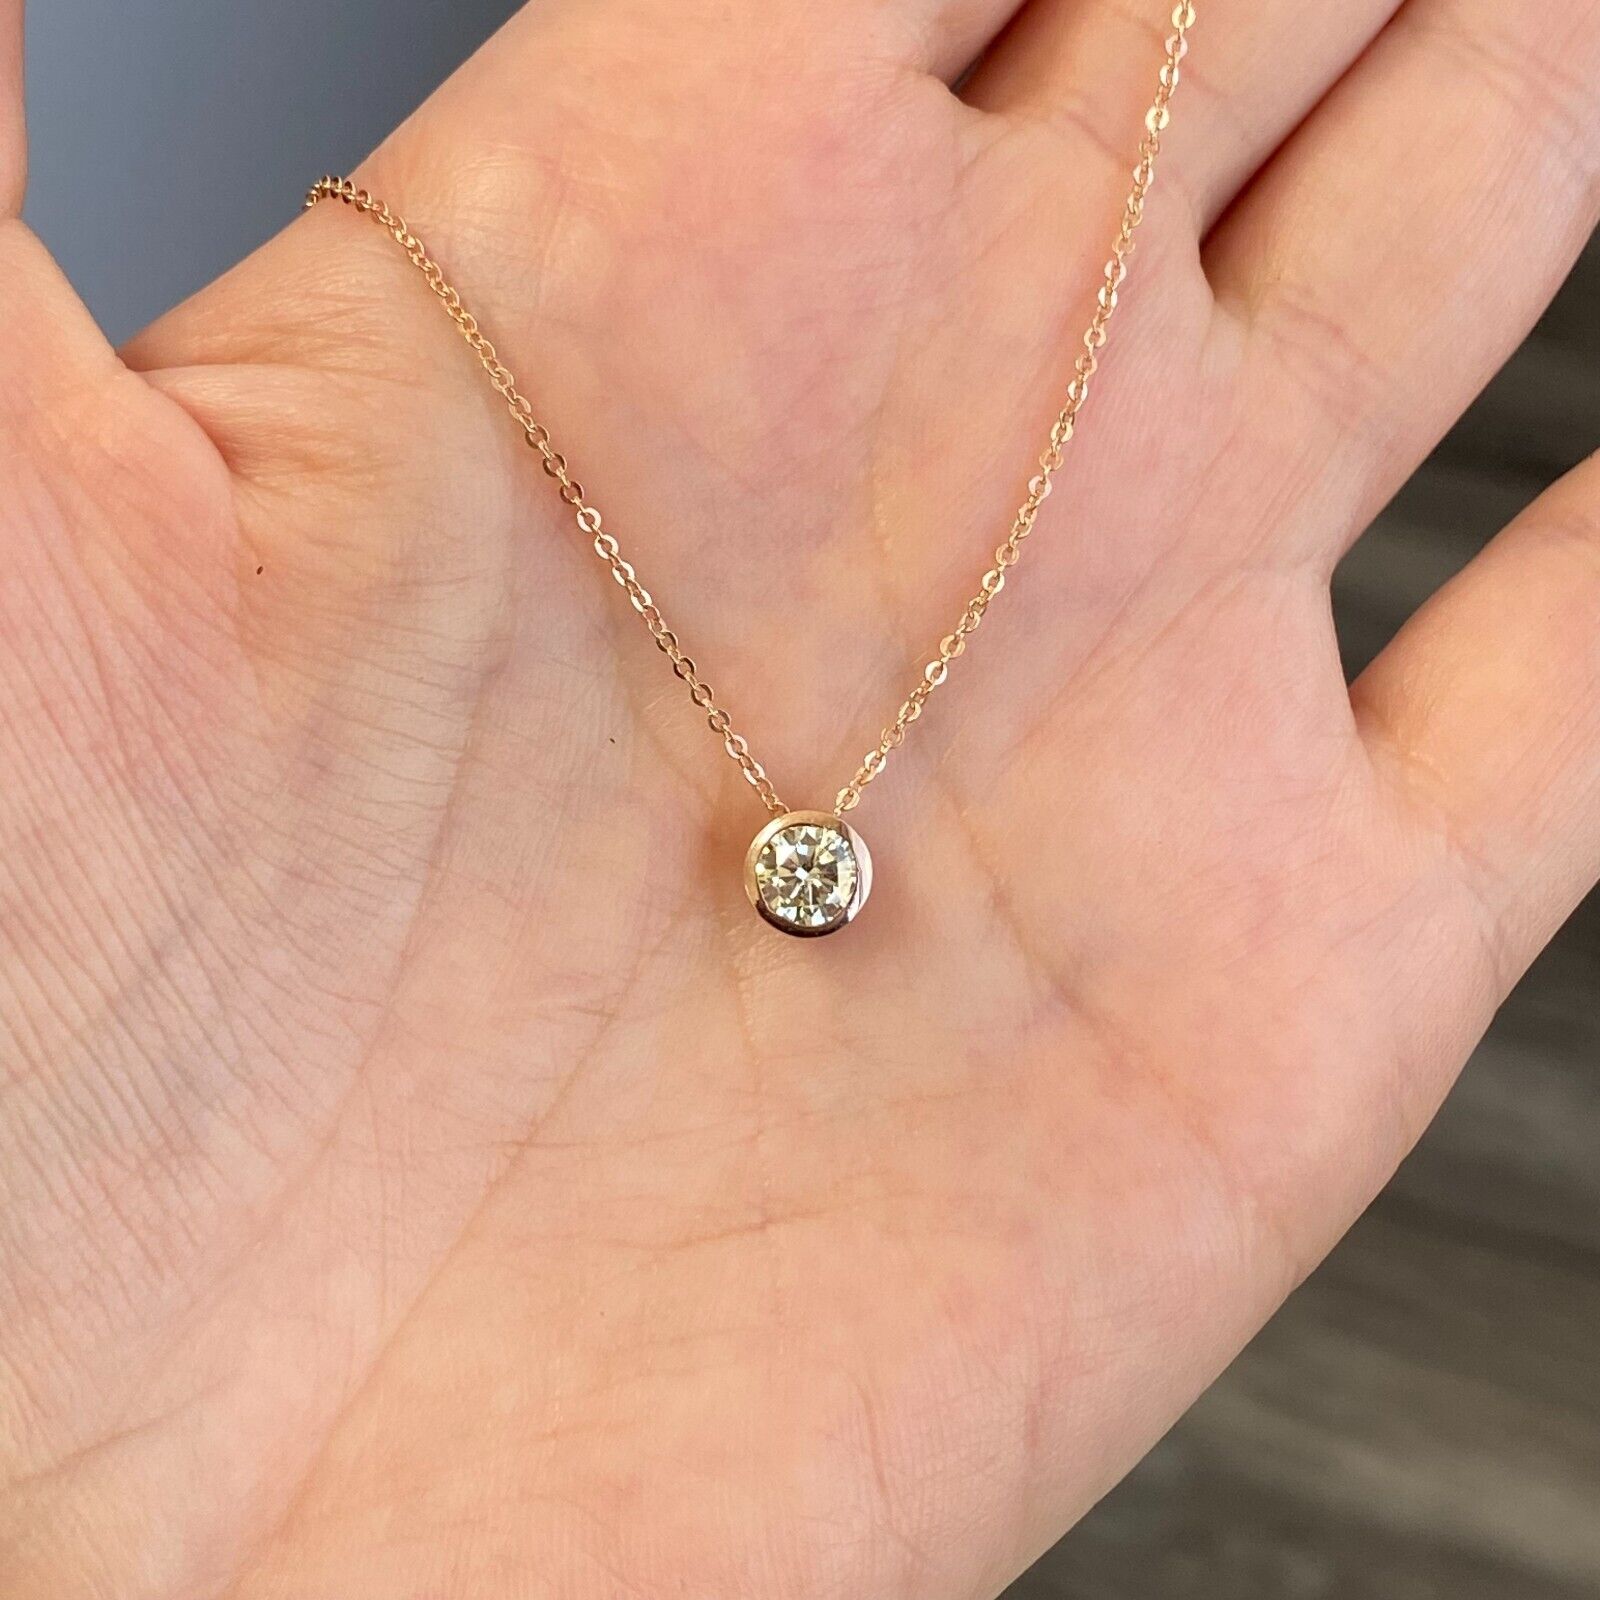 0.60ct Diamond Bezel Solitaire Necklace in 14k Rose Gold